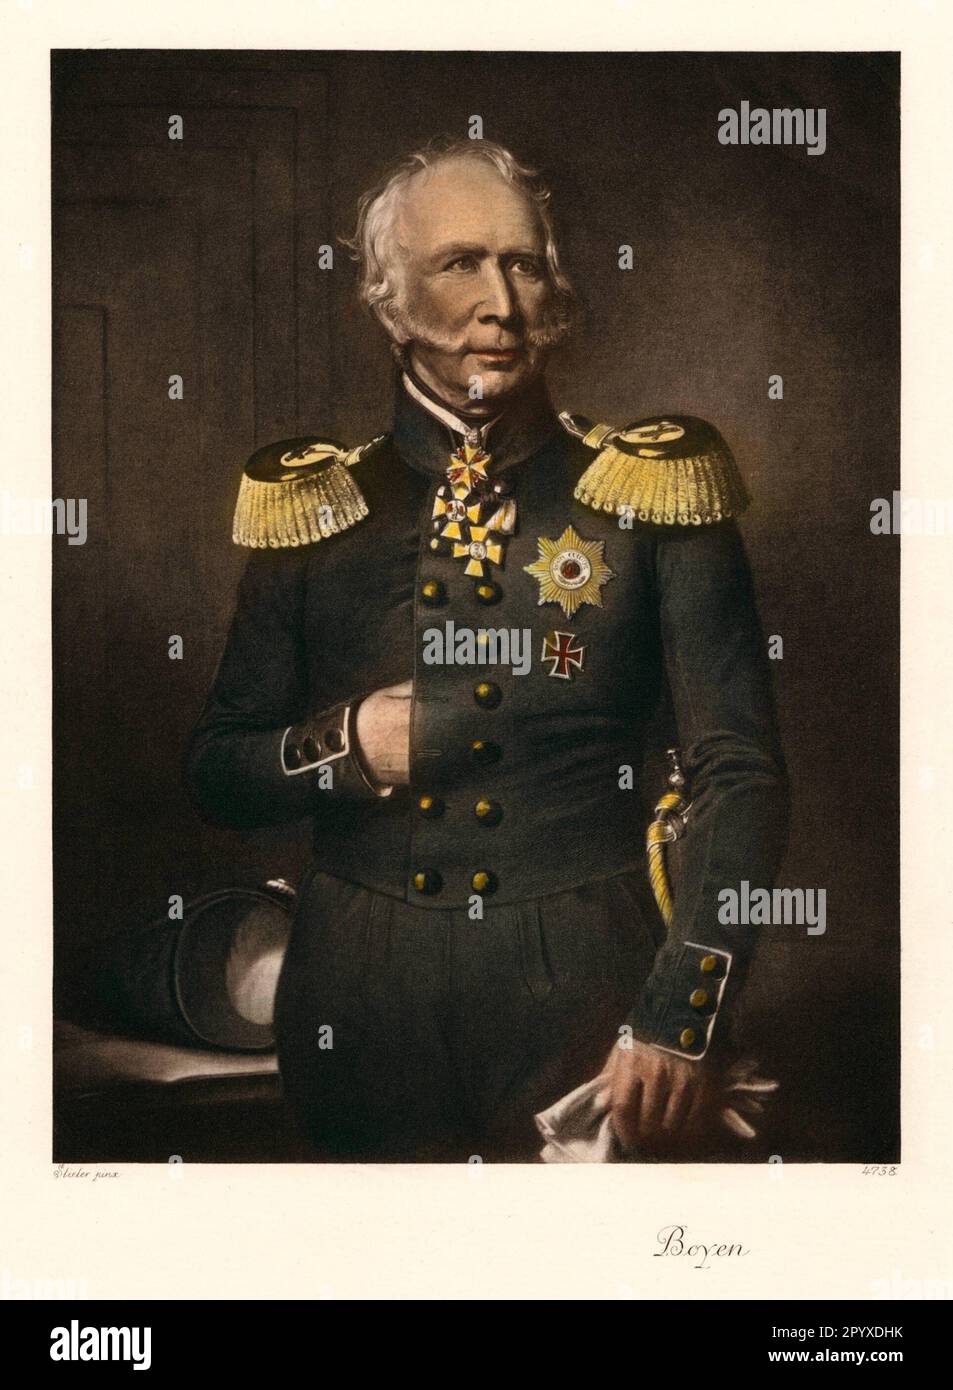 Hermann von Boyen (1771-1848), Prussian general and minister of war from 1814-1819 and from 1841-1847. Resigned in 1819 because of opposition to his army reform plans. Painting by Joseph Karl Stieler (1781-1858). Photo: Heliogravure, Corpus Imaginum, Hanfstaengl Collection. [automated translation] Stock Photo